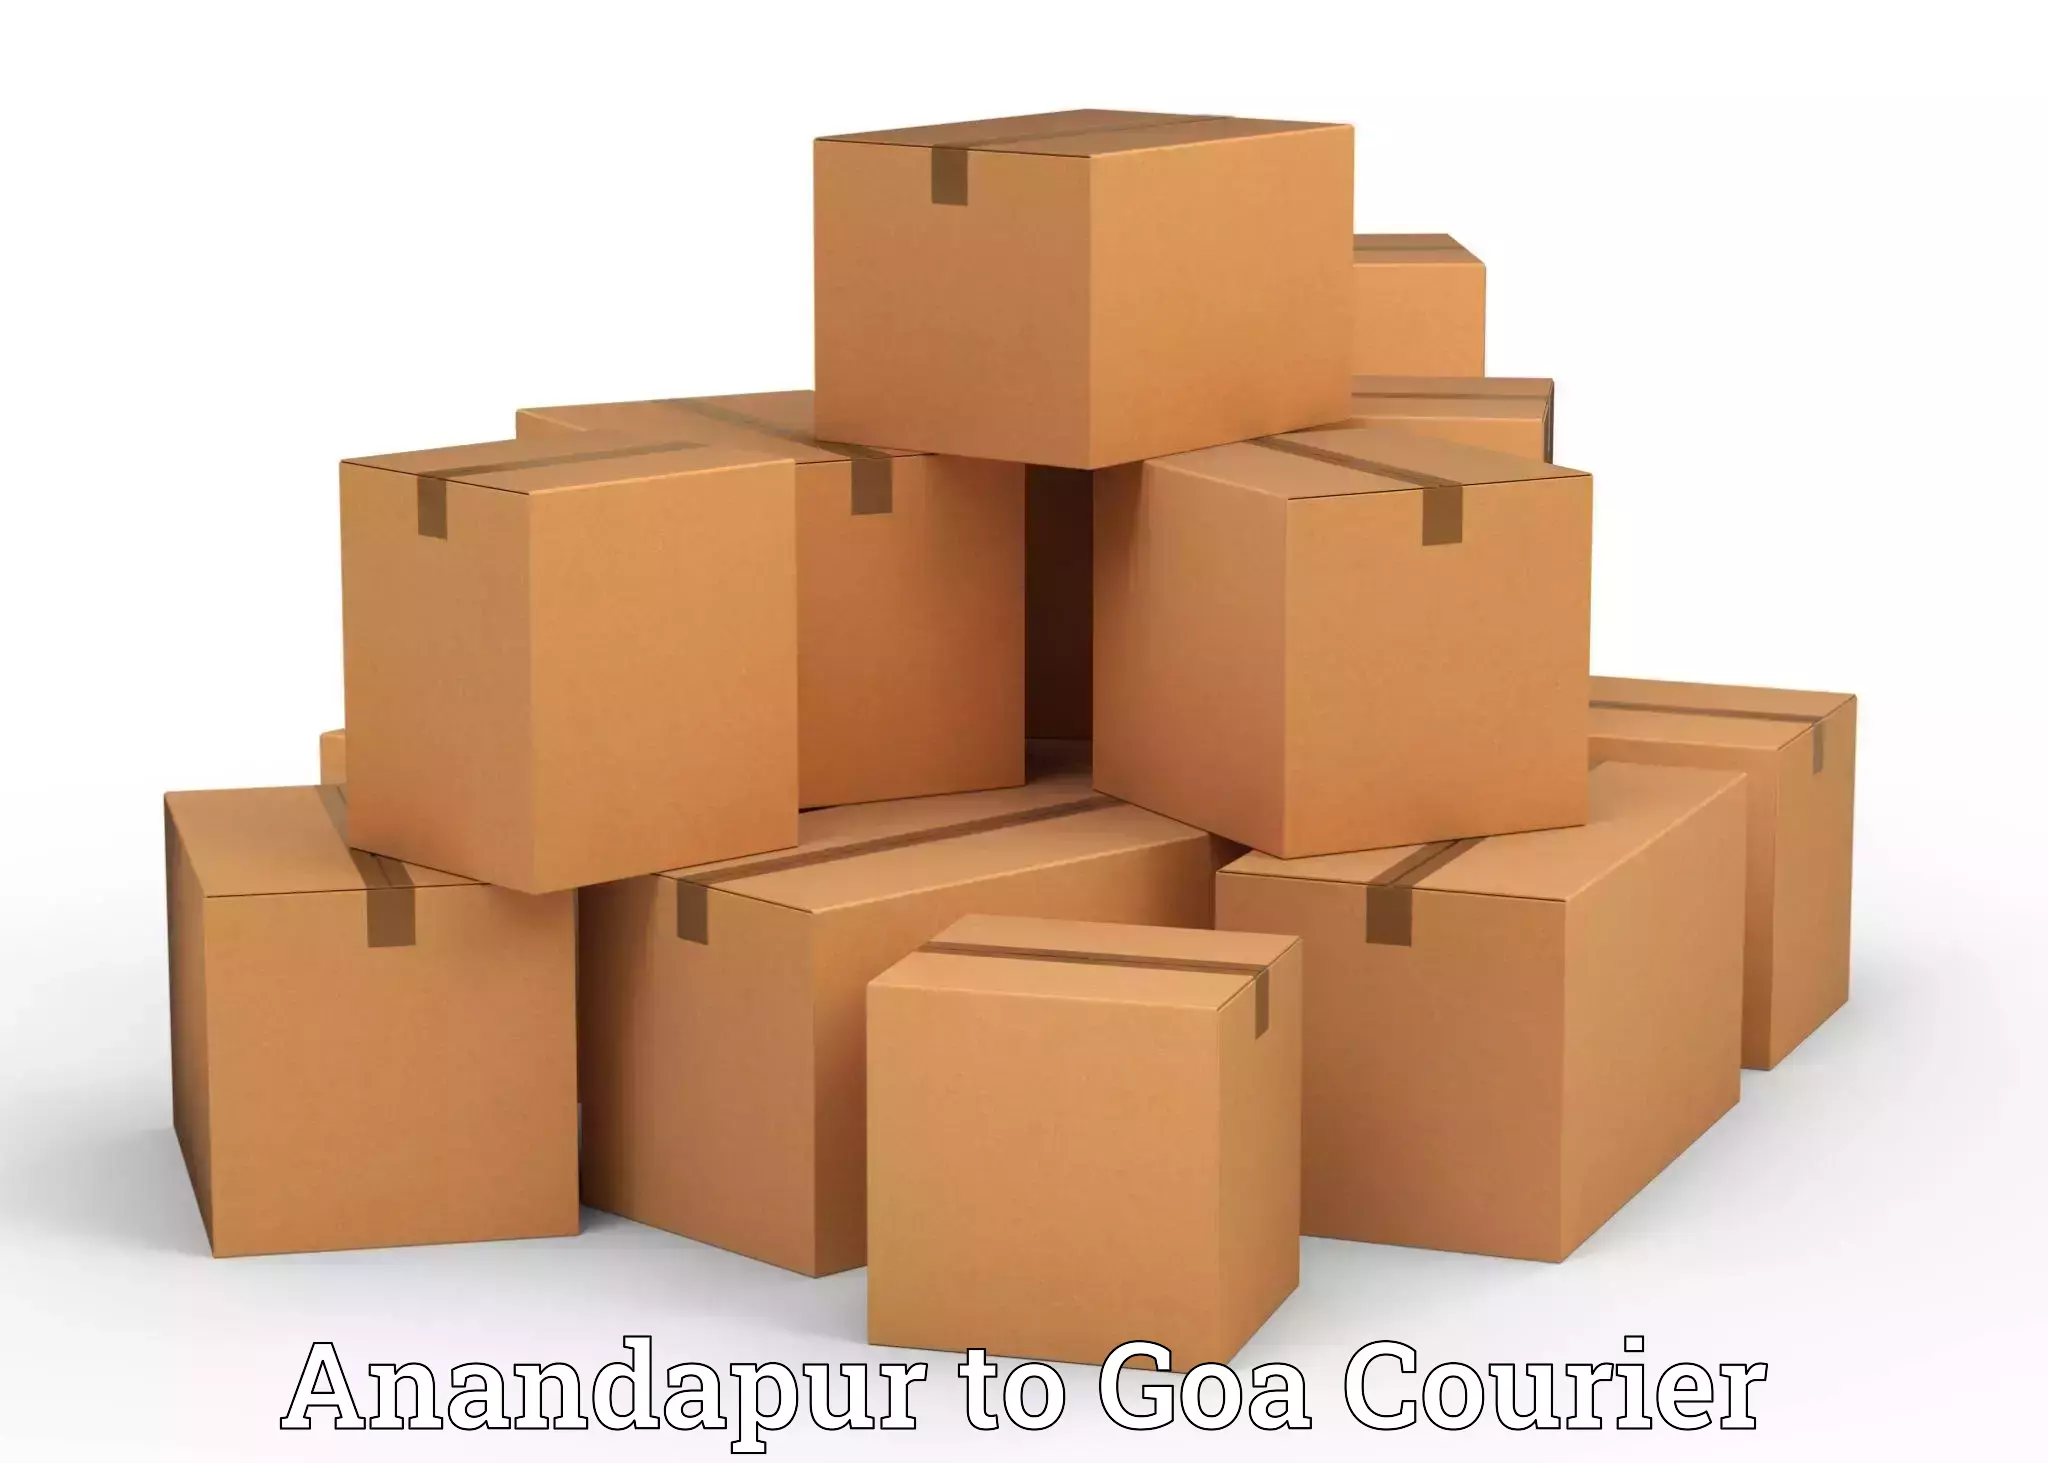 Professional packing services Anandapur to Panaji